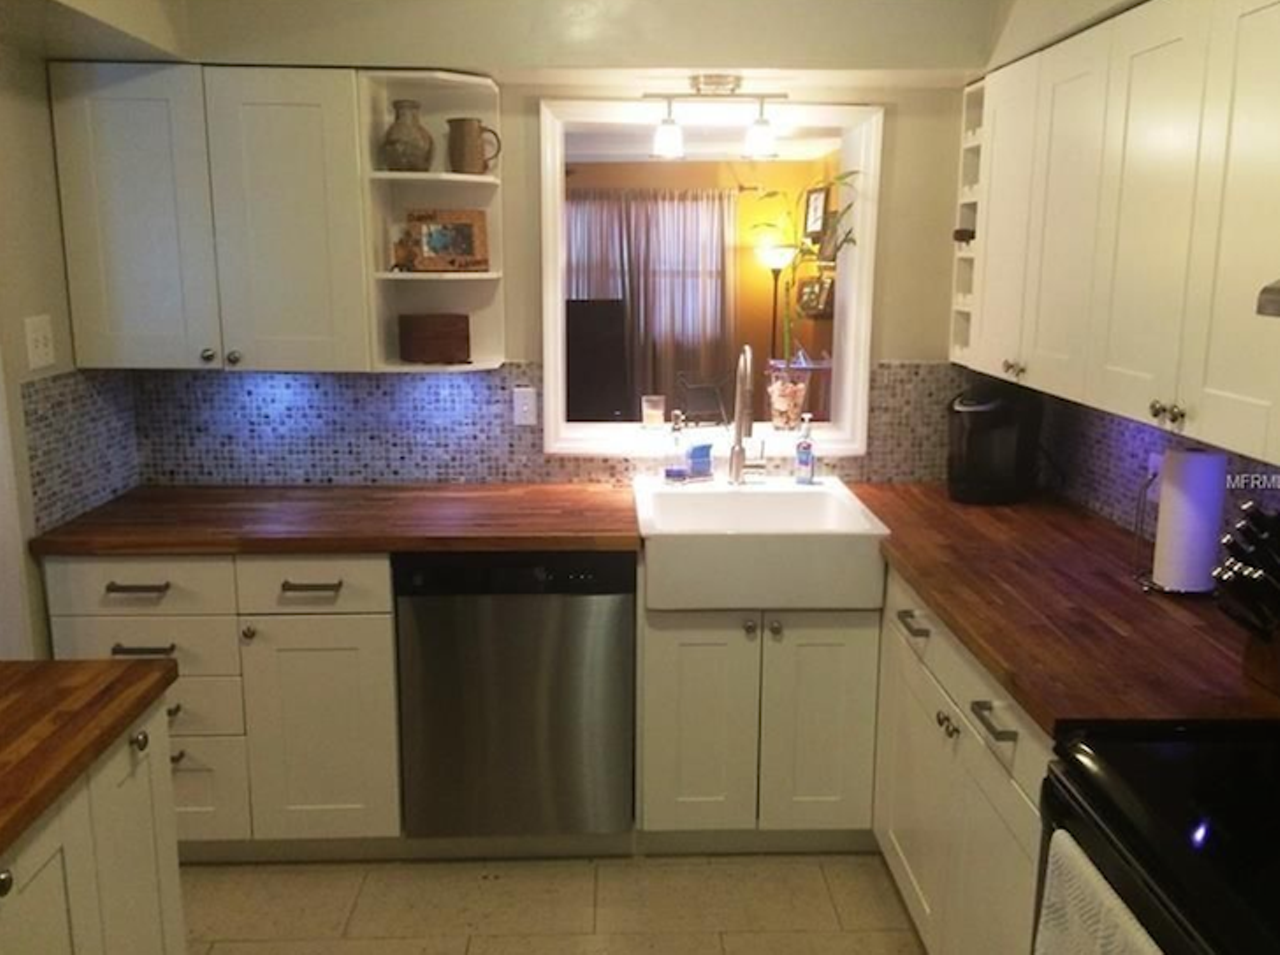 3207 Dupree Ave 
3 beds,  2 full baths, 1,408 sq ft, 7,841 sq ft lot
$235,000 
The kitchen has been redone with IKEA cabinets, butcher block counters, glass tile back splash and a new 2016 dishwasher.